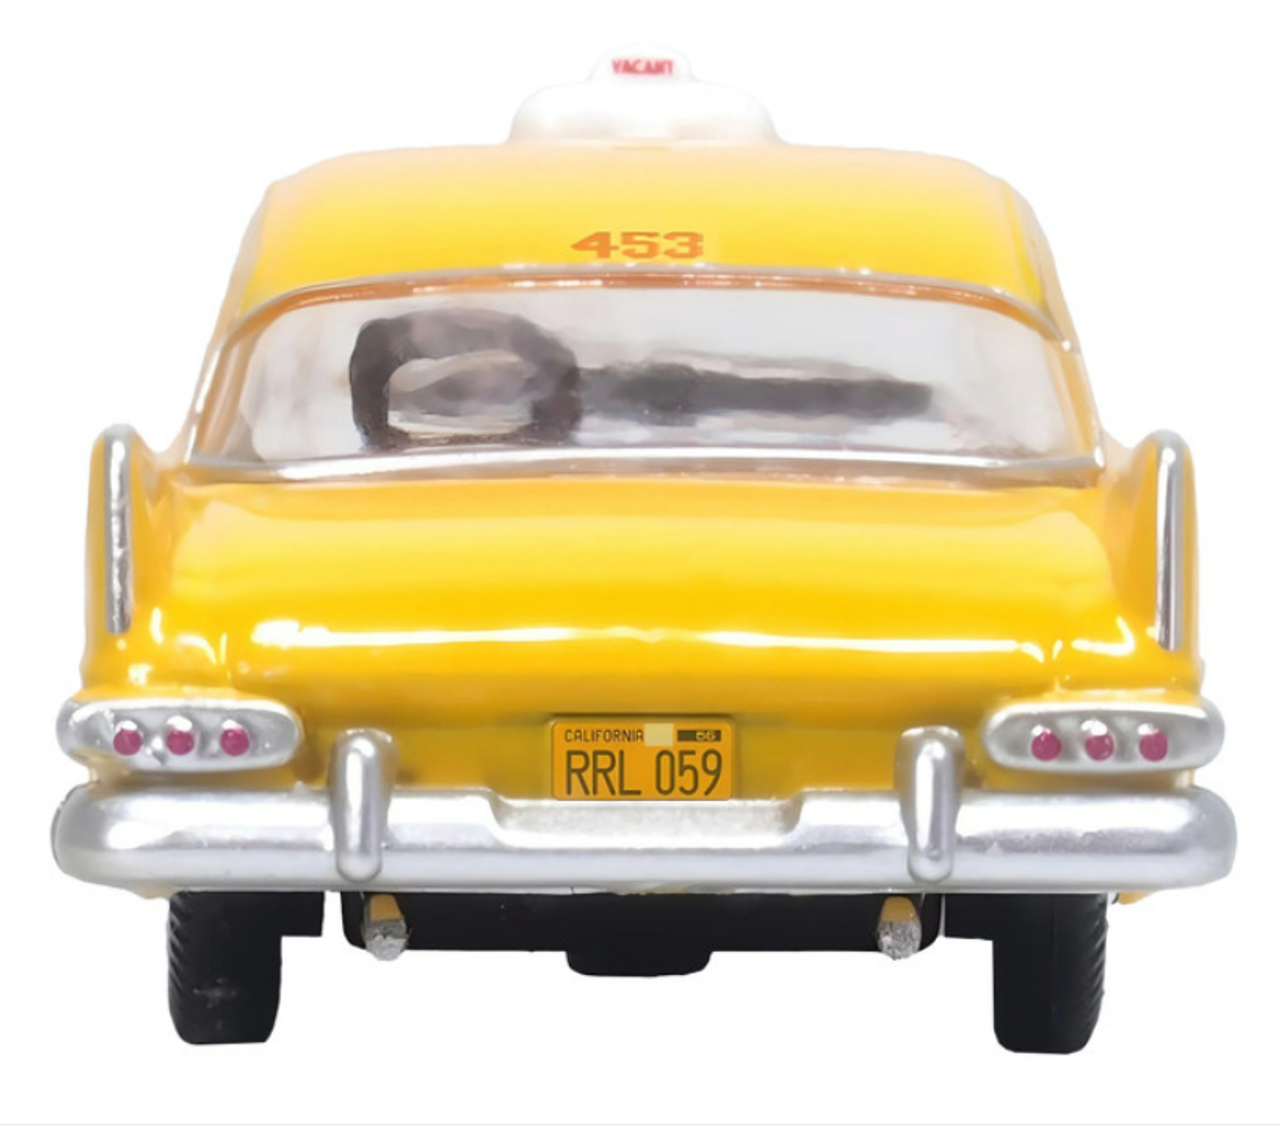 1959 Plymouth Belvedere Taxi Yellow "Tanner Yellow Cab Co." 1/87 (HO) Scale Diecast Model Car by Oxford Diecast